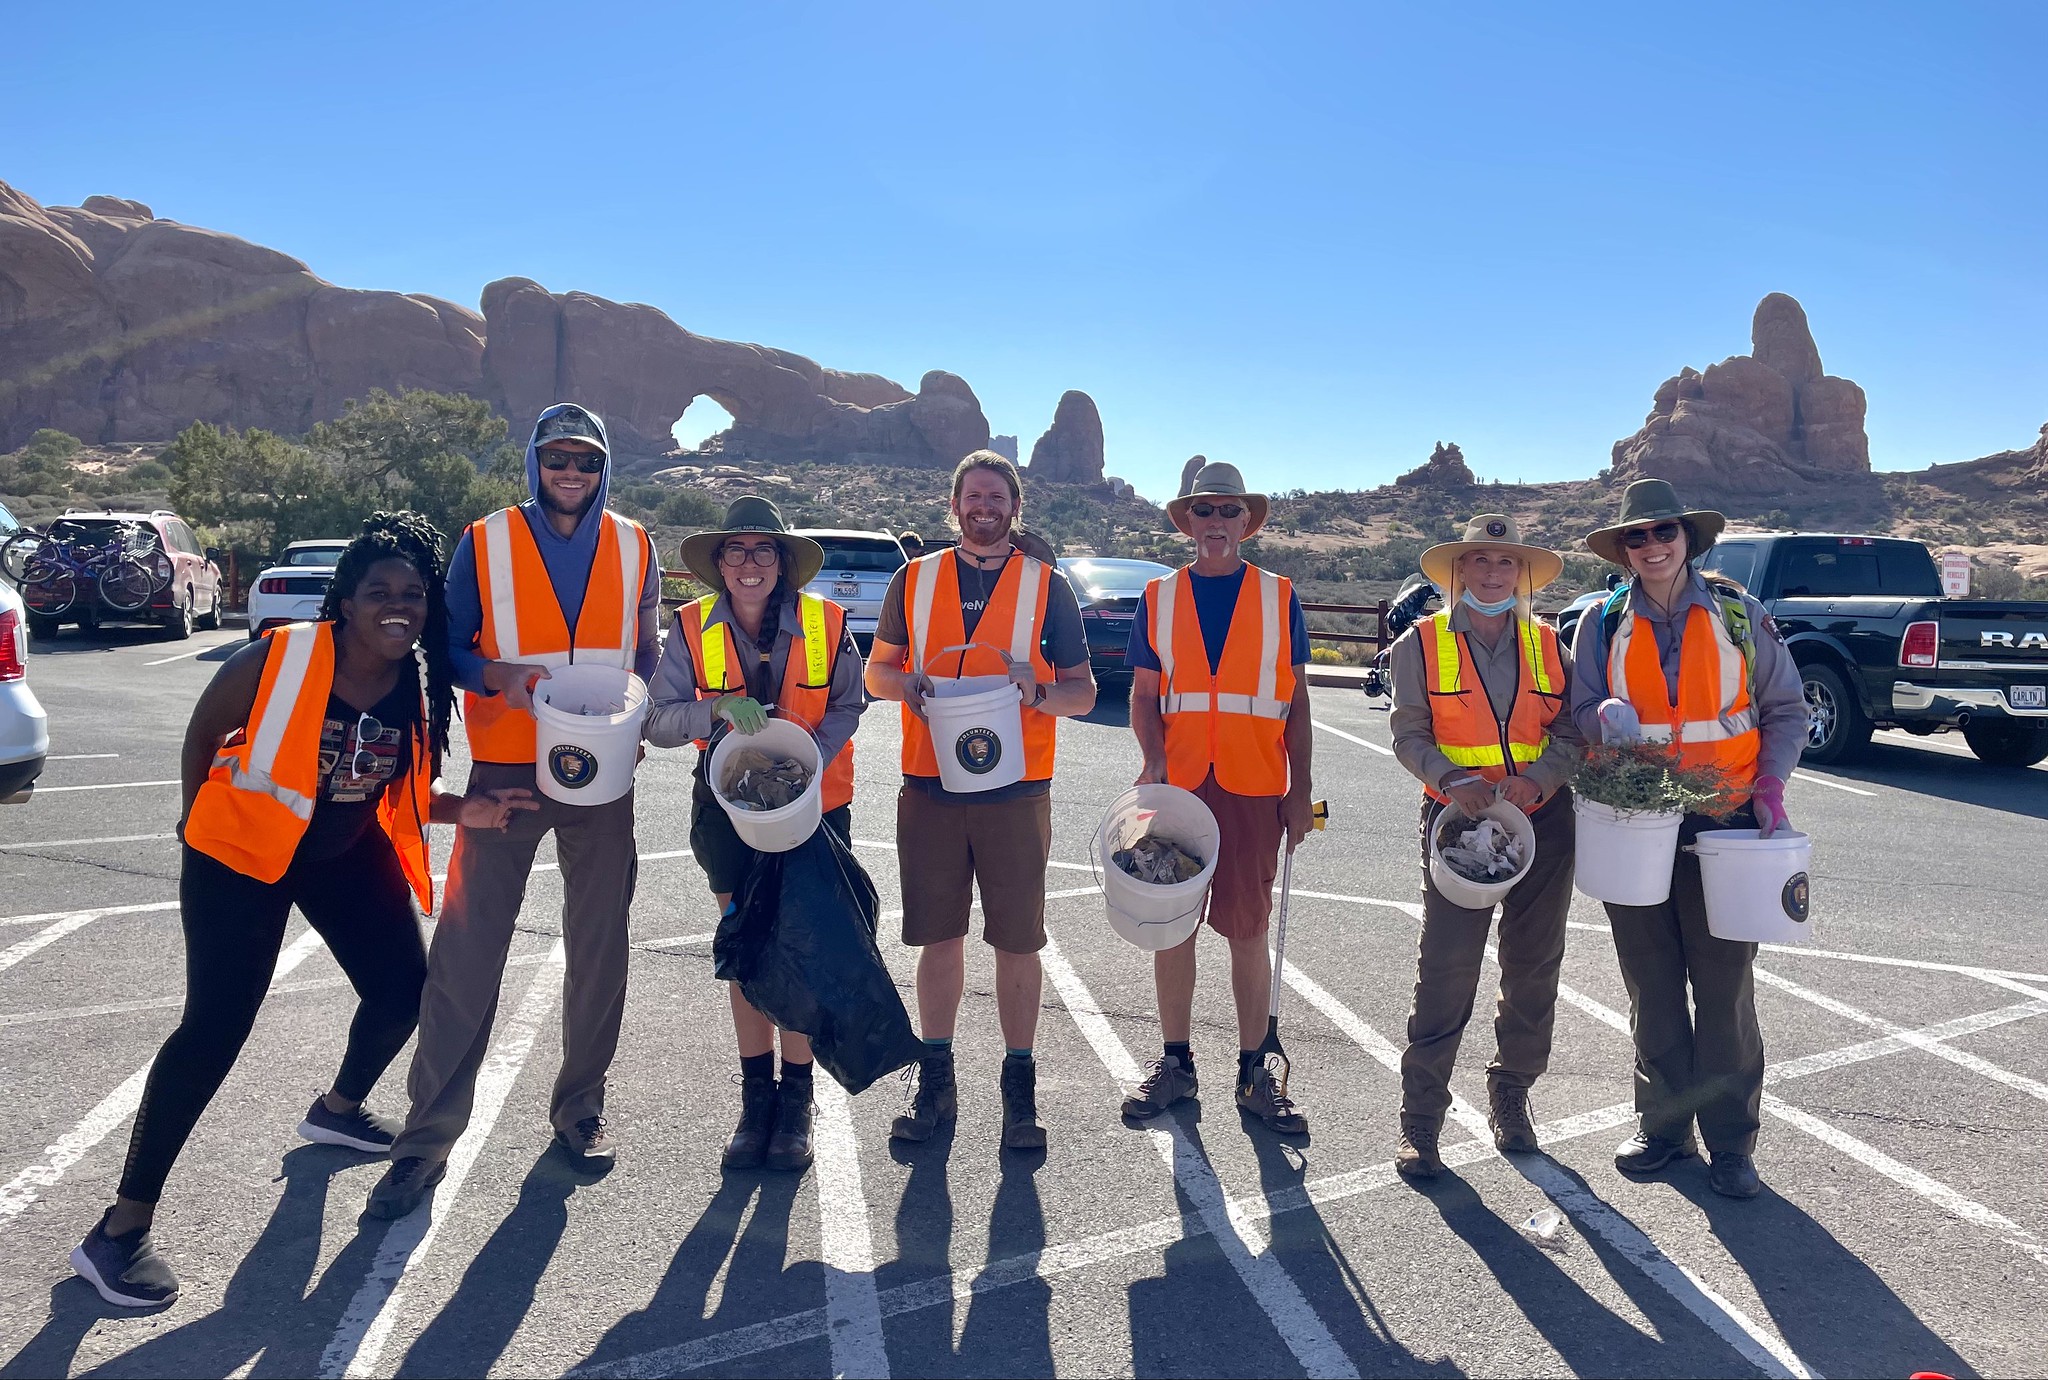 Litter Cleanup At Arches National Park